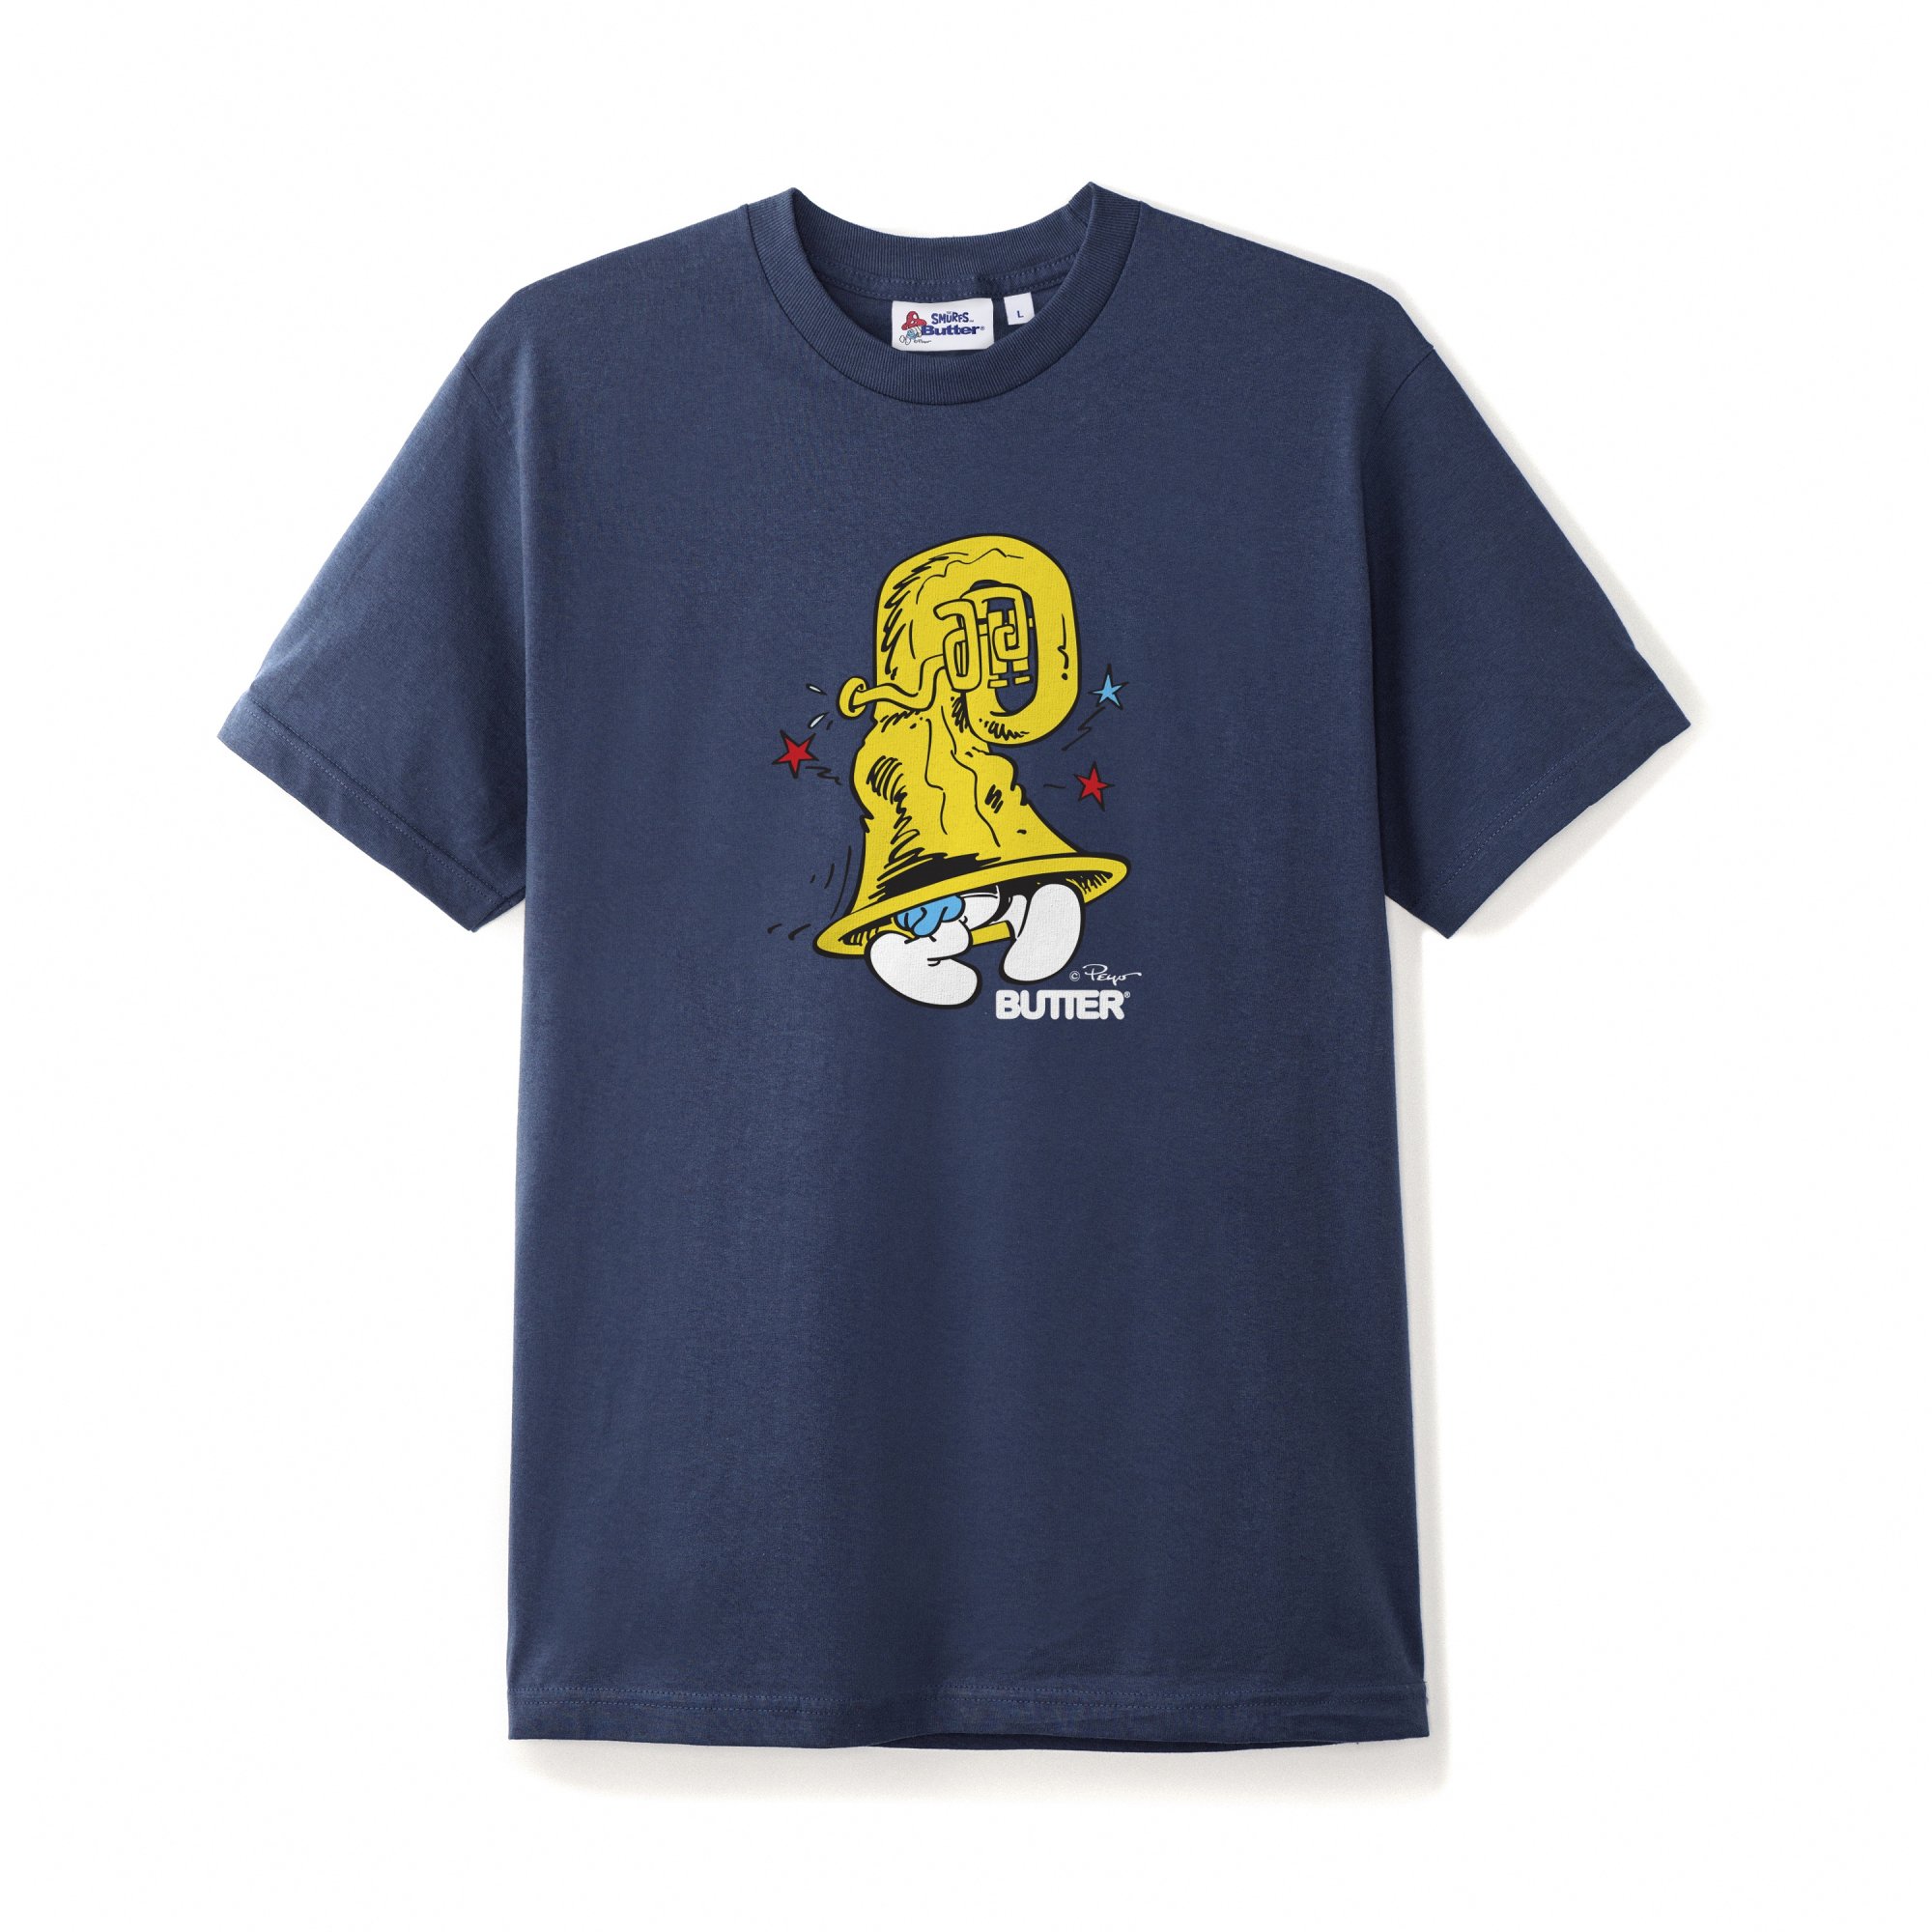 BUTTER GOODS×The Smurfs<br>Harmony Tee<br>